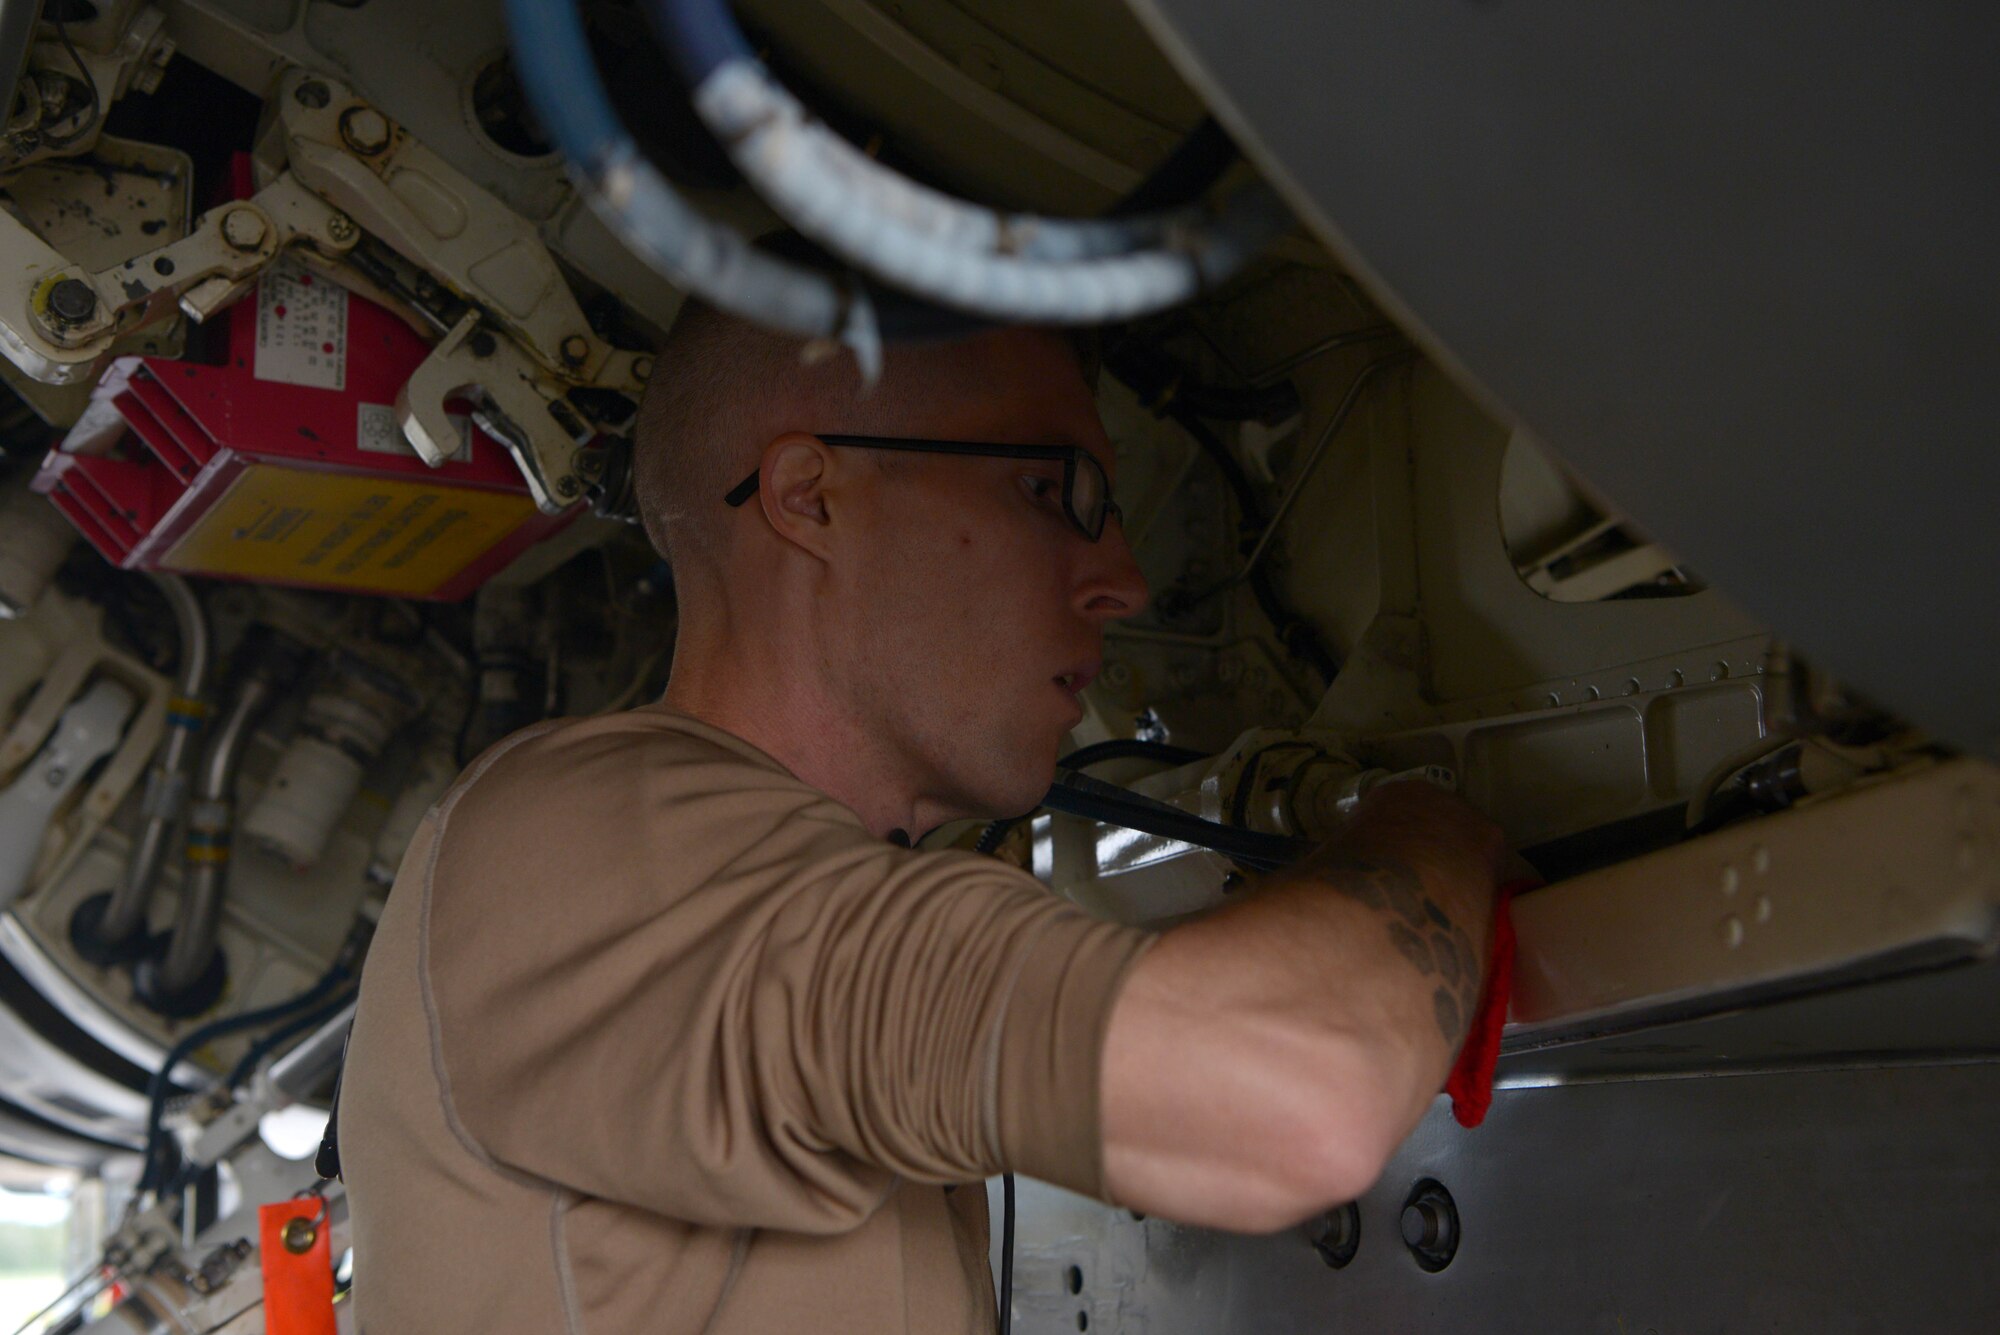 U.S. Air Force Senior Airman Joshua Zacharko, an 18th Aircraft Maintenance Unit (AMU) crew chief, cleans landing gear on an F-16 Fighting Falcon aircraft during RED FLAG-Alaska 20-3 on Eielson Air Force Base, Alaska, Aug. 4, 2020. It’s the responsibility of crew chiefs to ensure that every component of these high performance aircraft is maintained to the highest standards.(U.S. Air Force photo by Senior Airman Beaux Hebert)